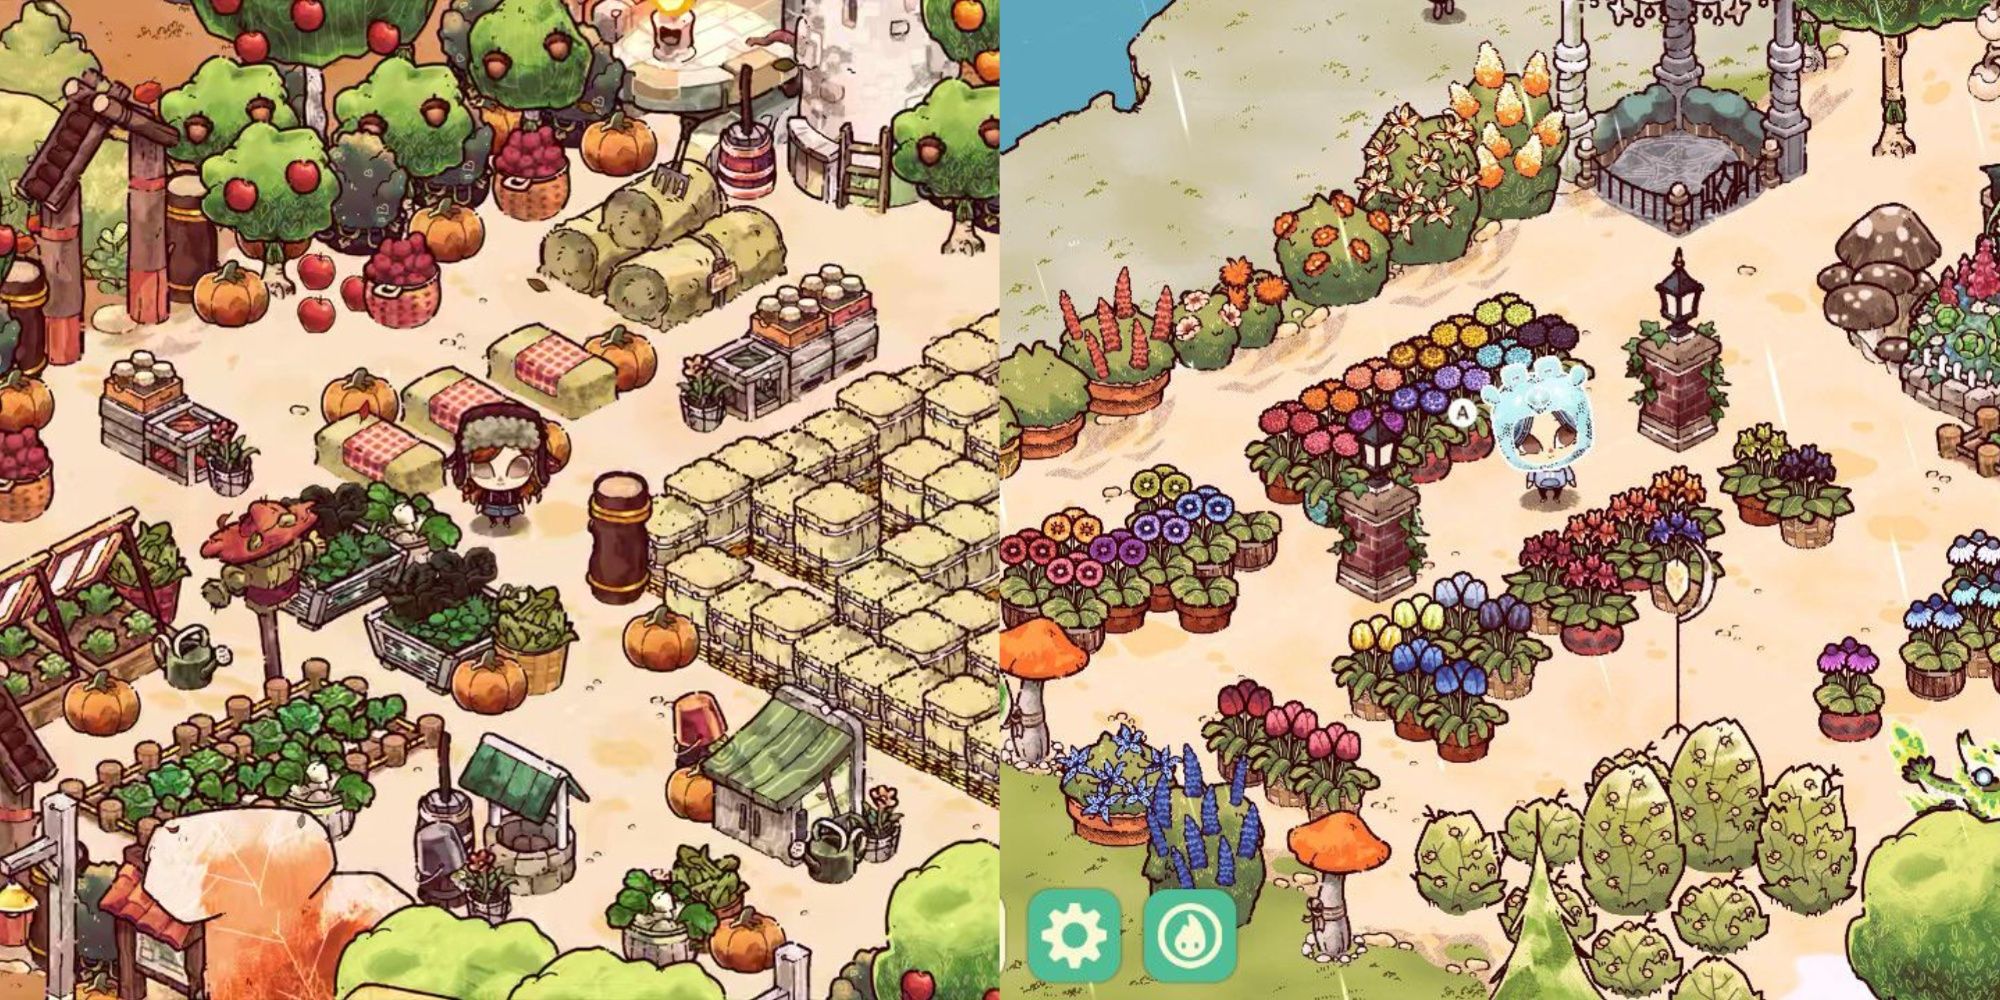 Cozy Grove Player Standing Among Farm Furniture And Floral Items In Base With Flower Pots And Trees